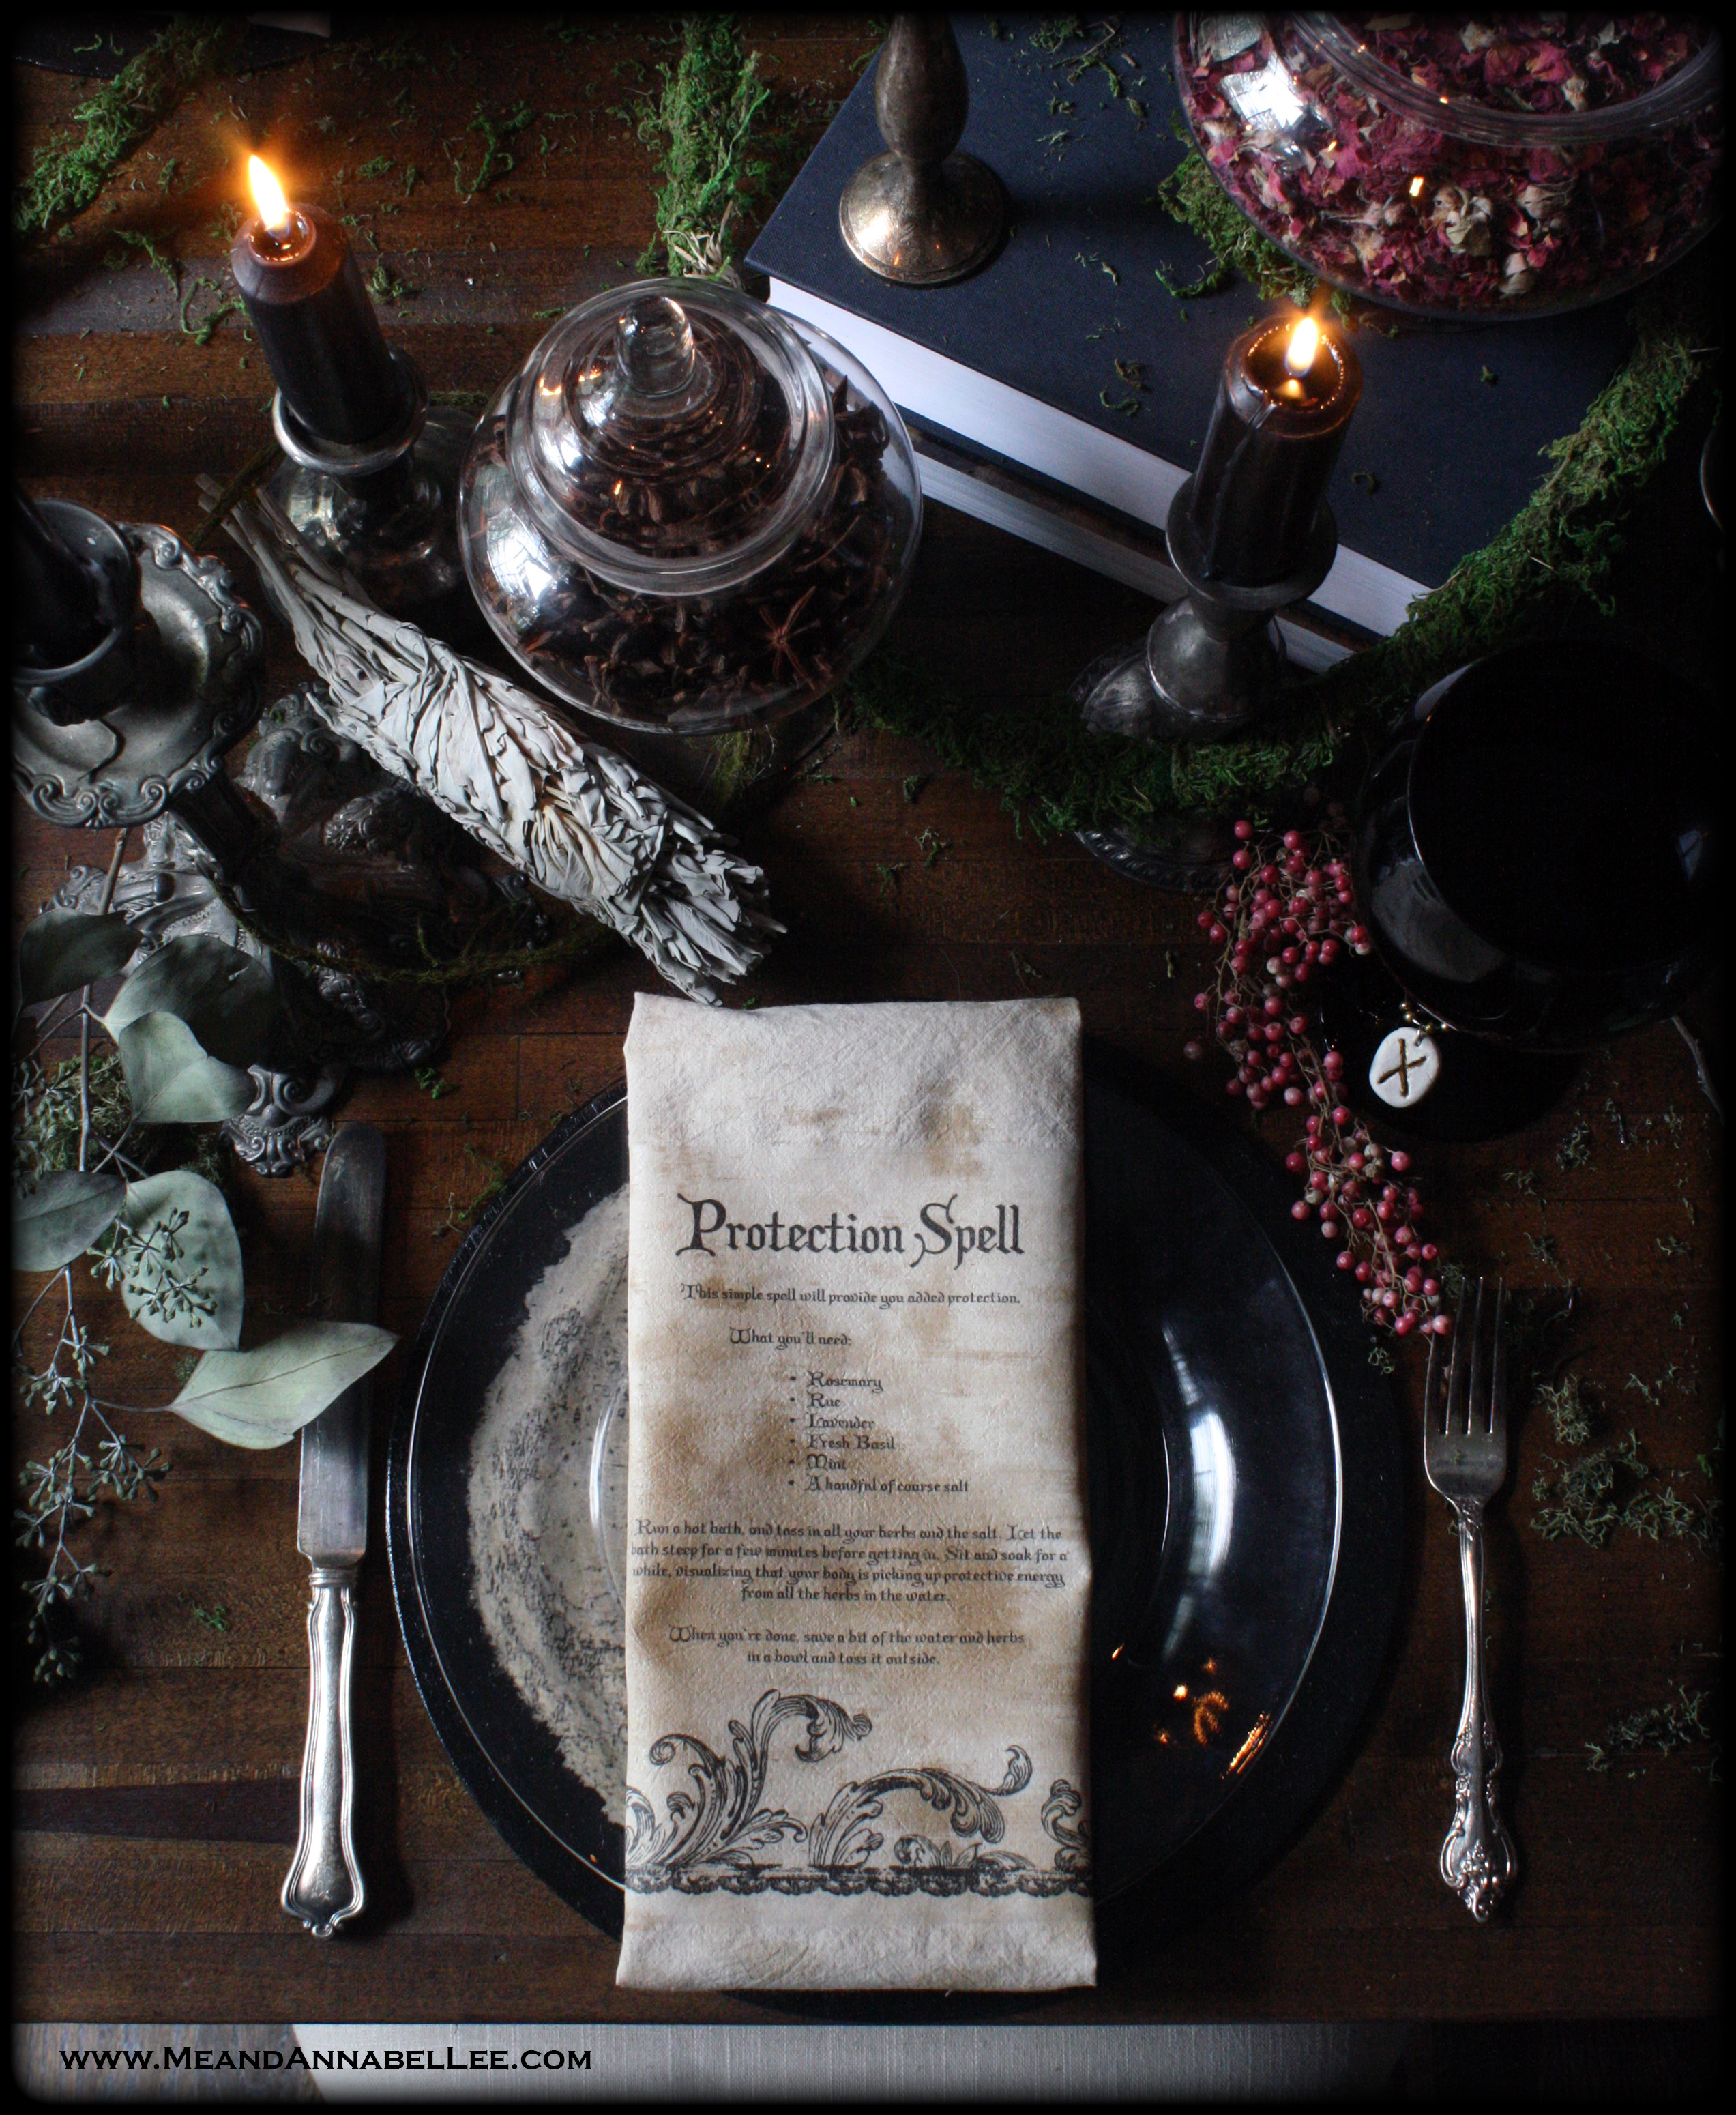 DIY Tea Stained Witches Spell Napkins | Samhain Dinner Party Table Setting | Protection Spell | Halloween Crafts | Image Transfer | www.MeandAnnabelLee.com